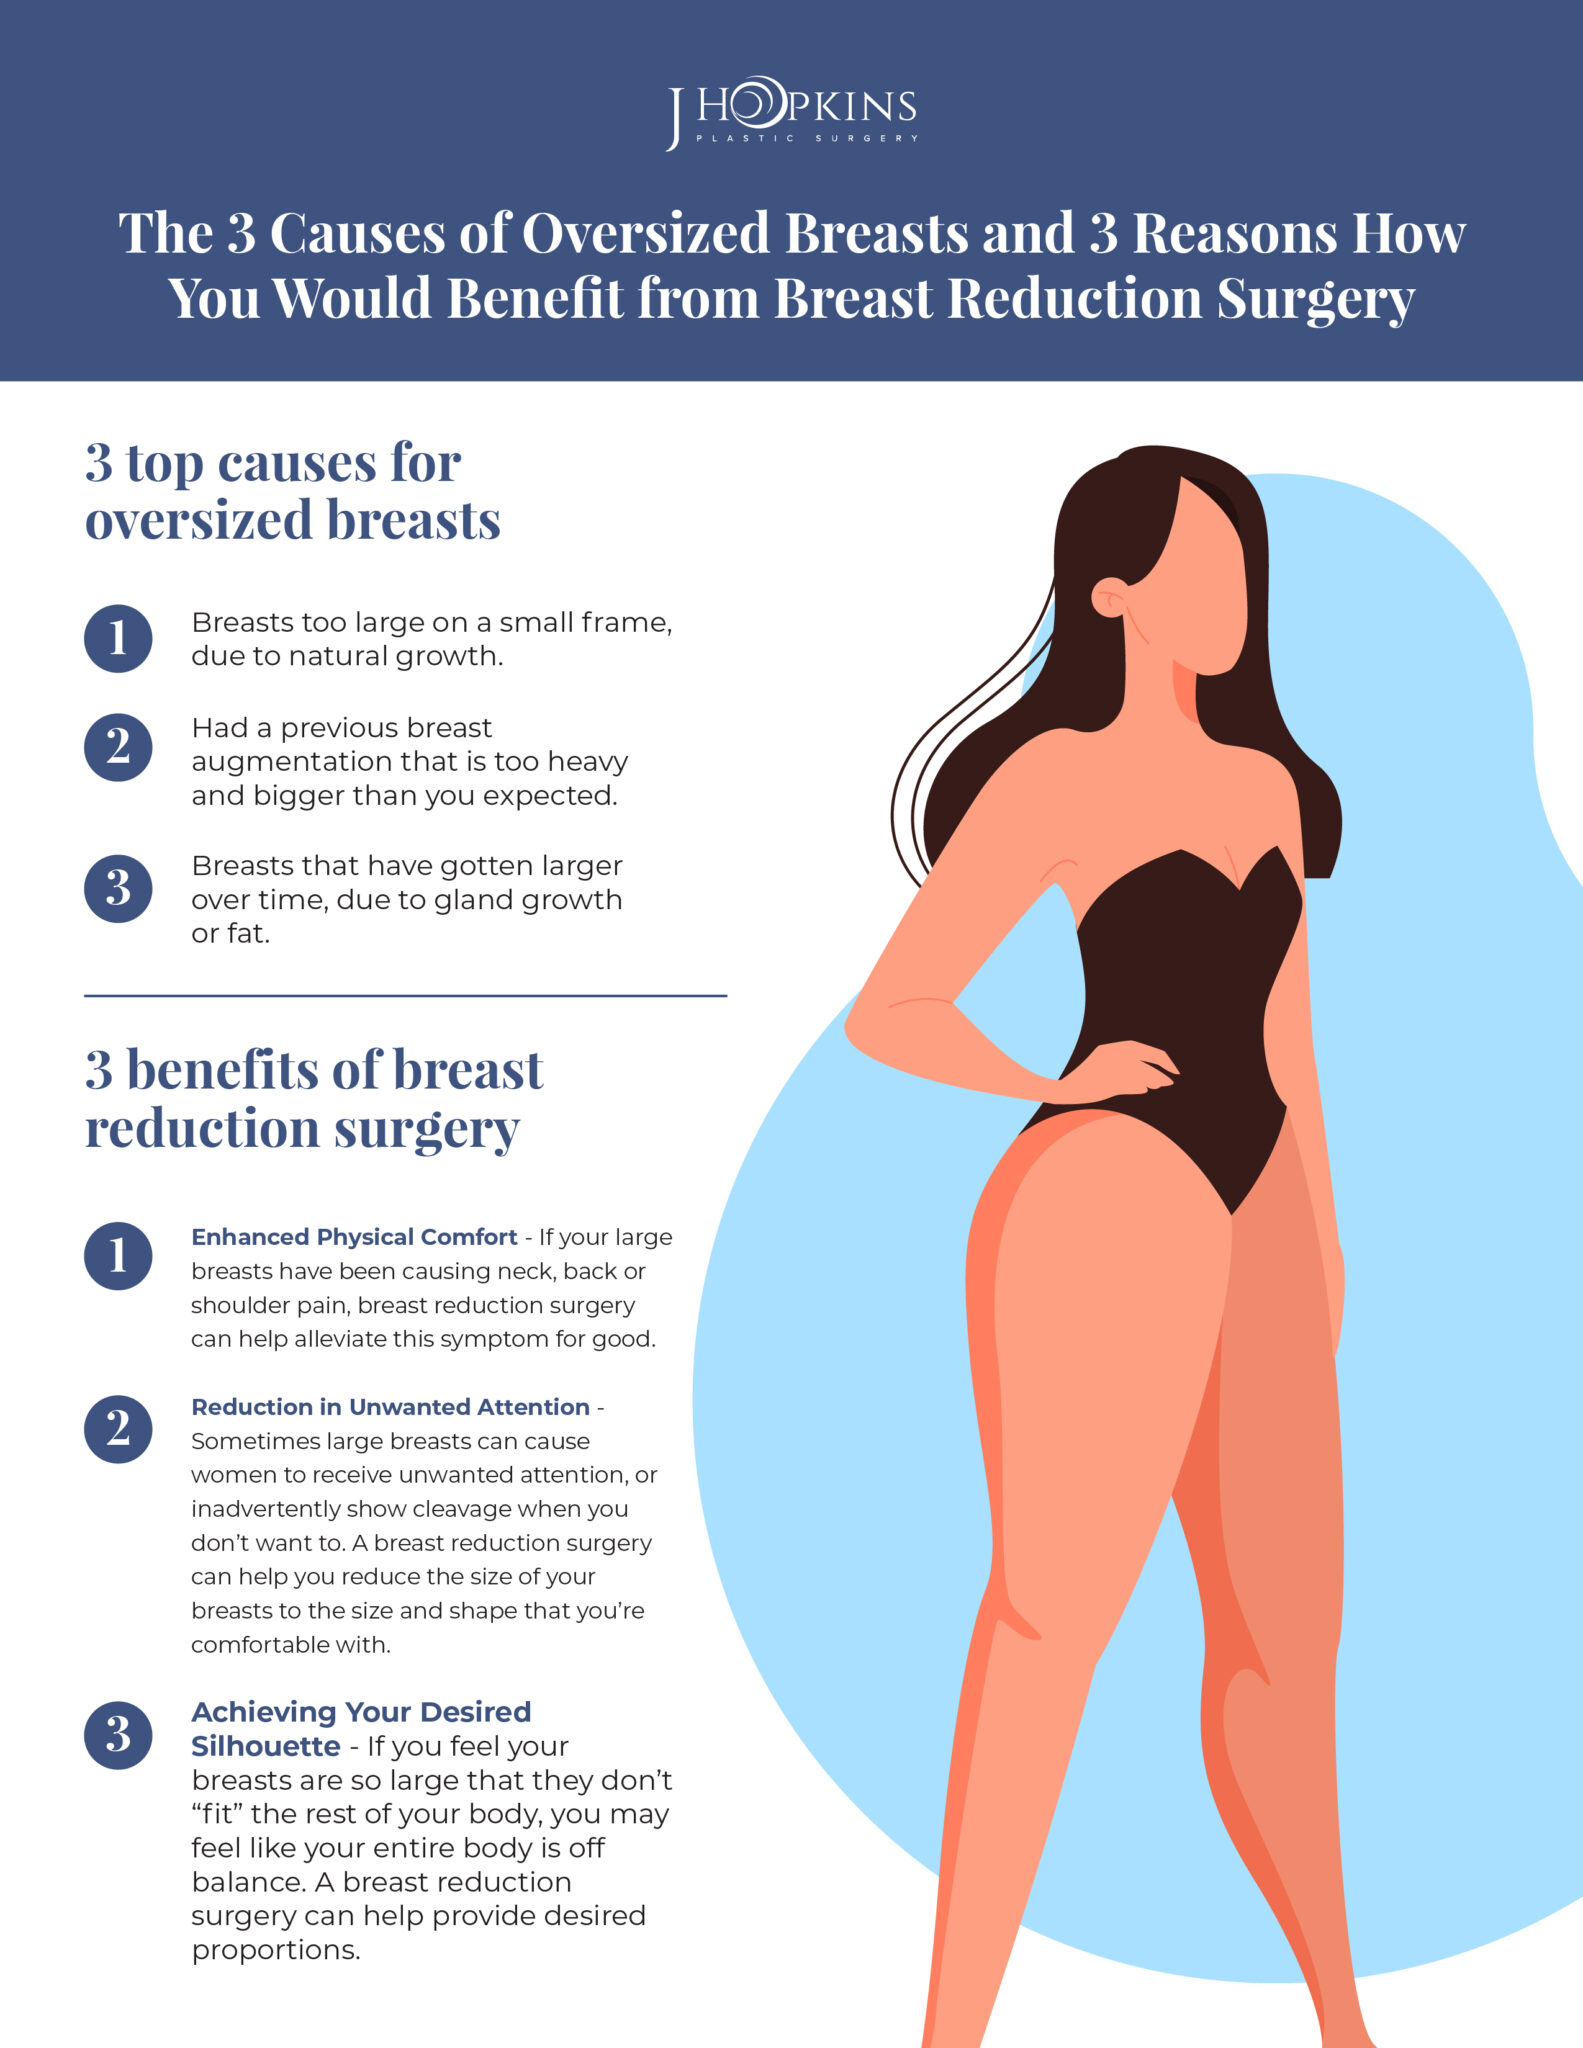 Breast reduction- How small should I go? What do I really have?